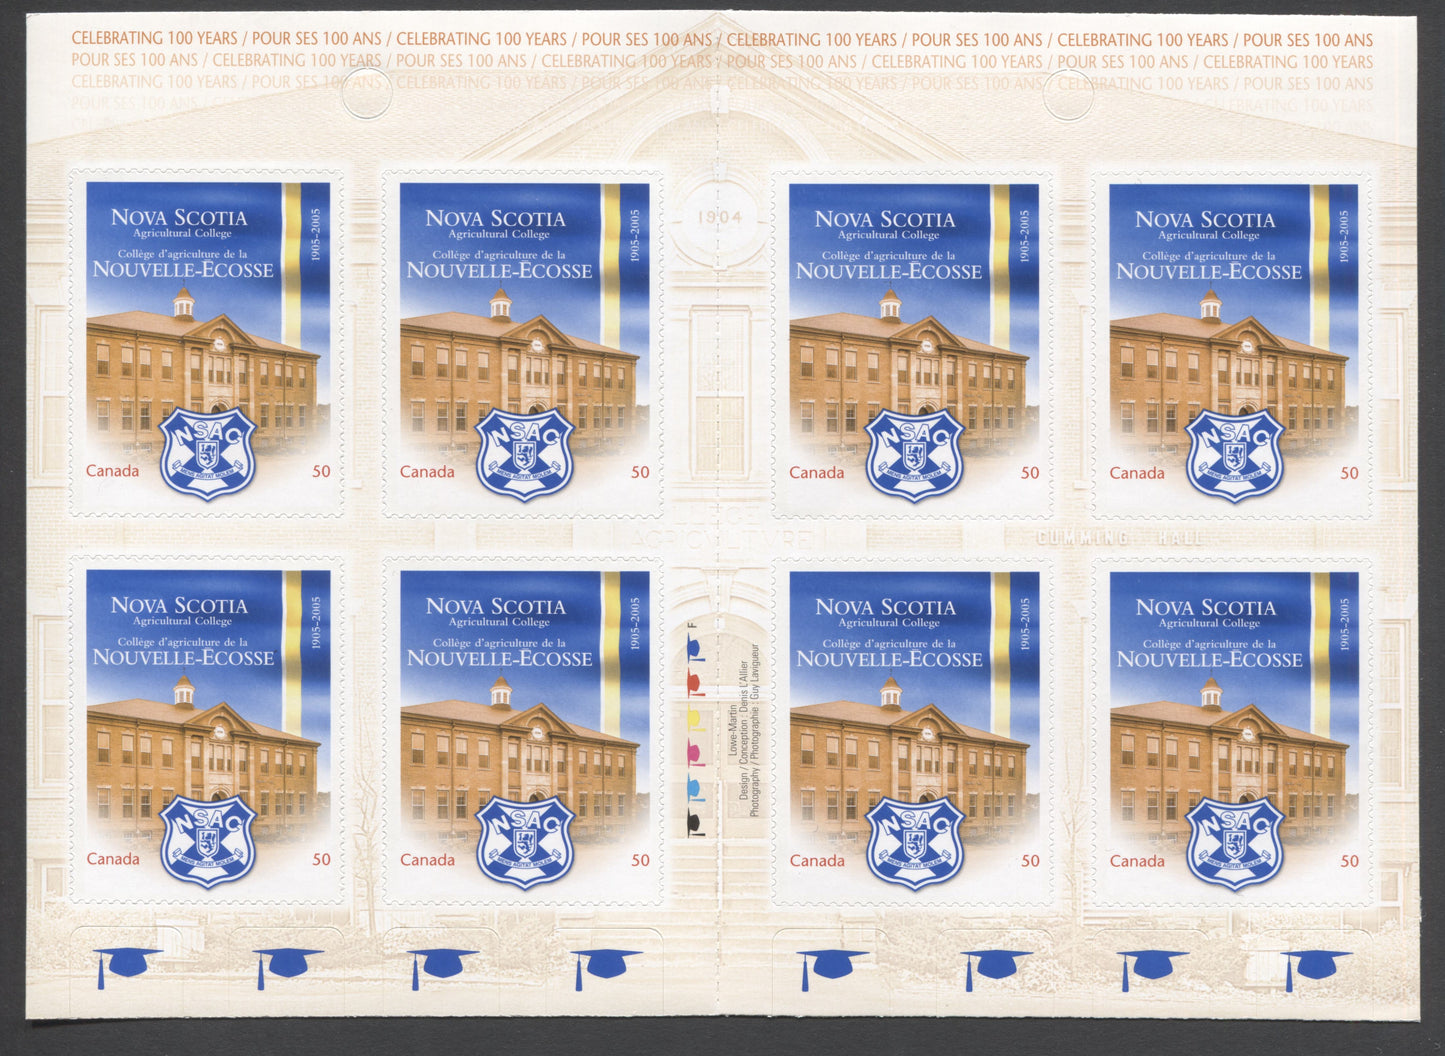 Canada #BK307 2005 Nova Scotia Agricultural College Issue, Complete $4 Booklet, Fasson Paper, Dead Paper, 4 mm GT-4 Tagging